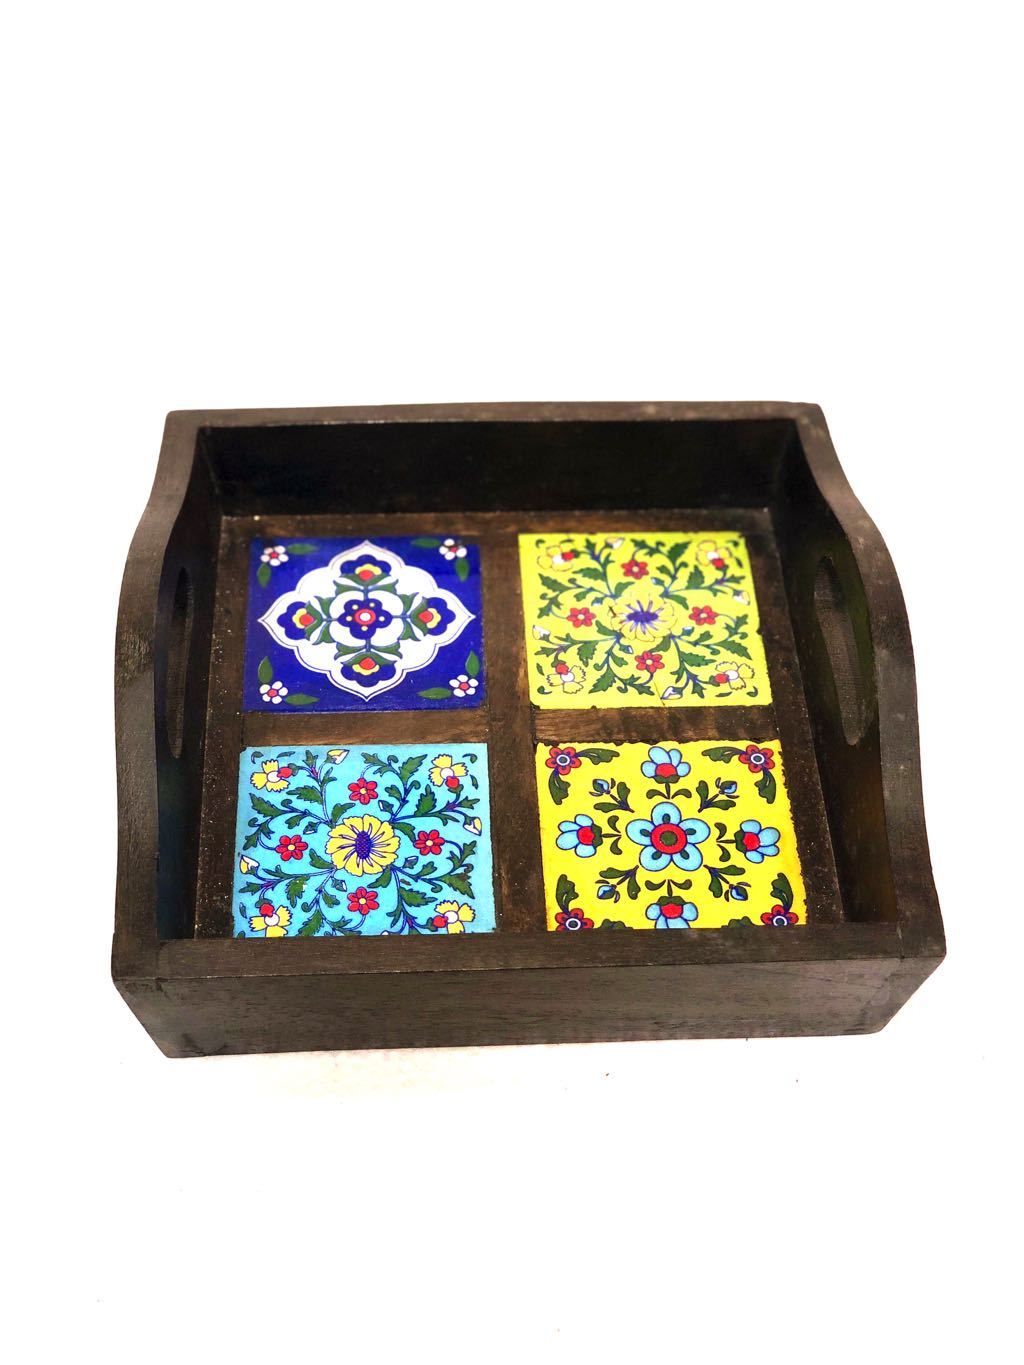 Blue Pottery Tiles Fitted On Strong Wooden Tray Home Decor By Tamrapatra - Tamrapatra